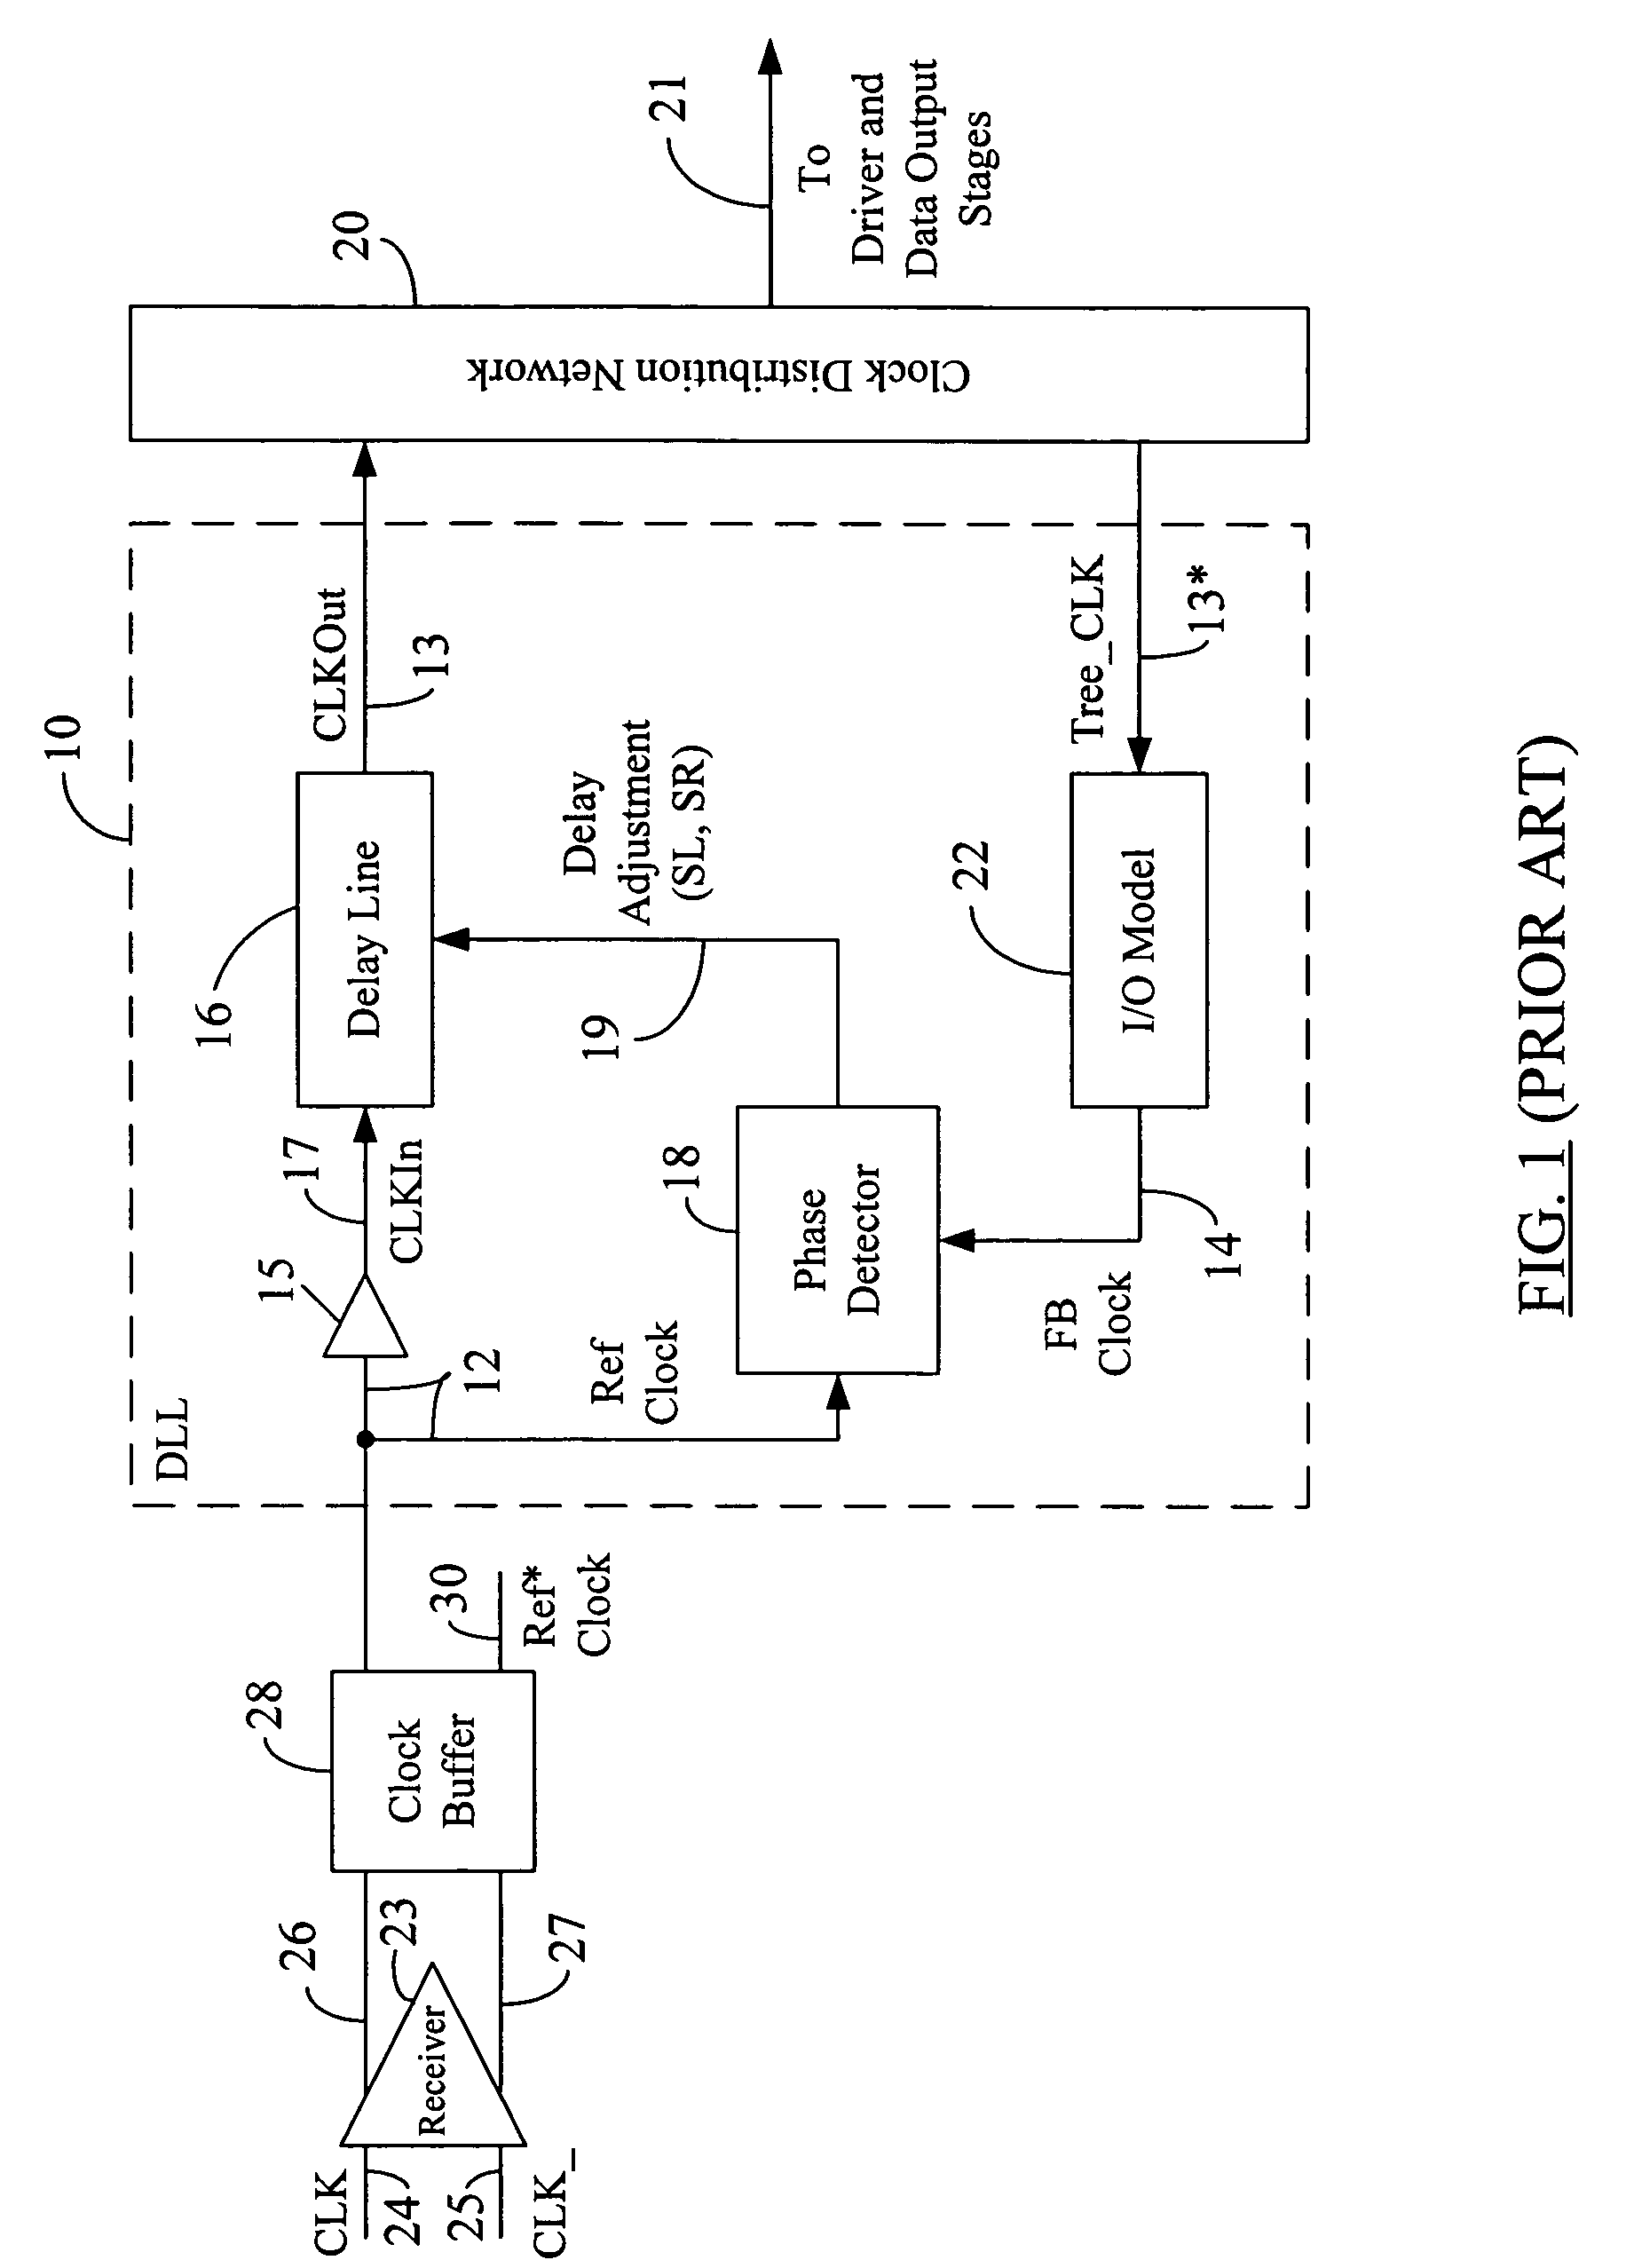 Centralizing the lock point of a synchronous circuit